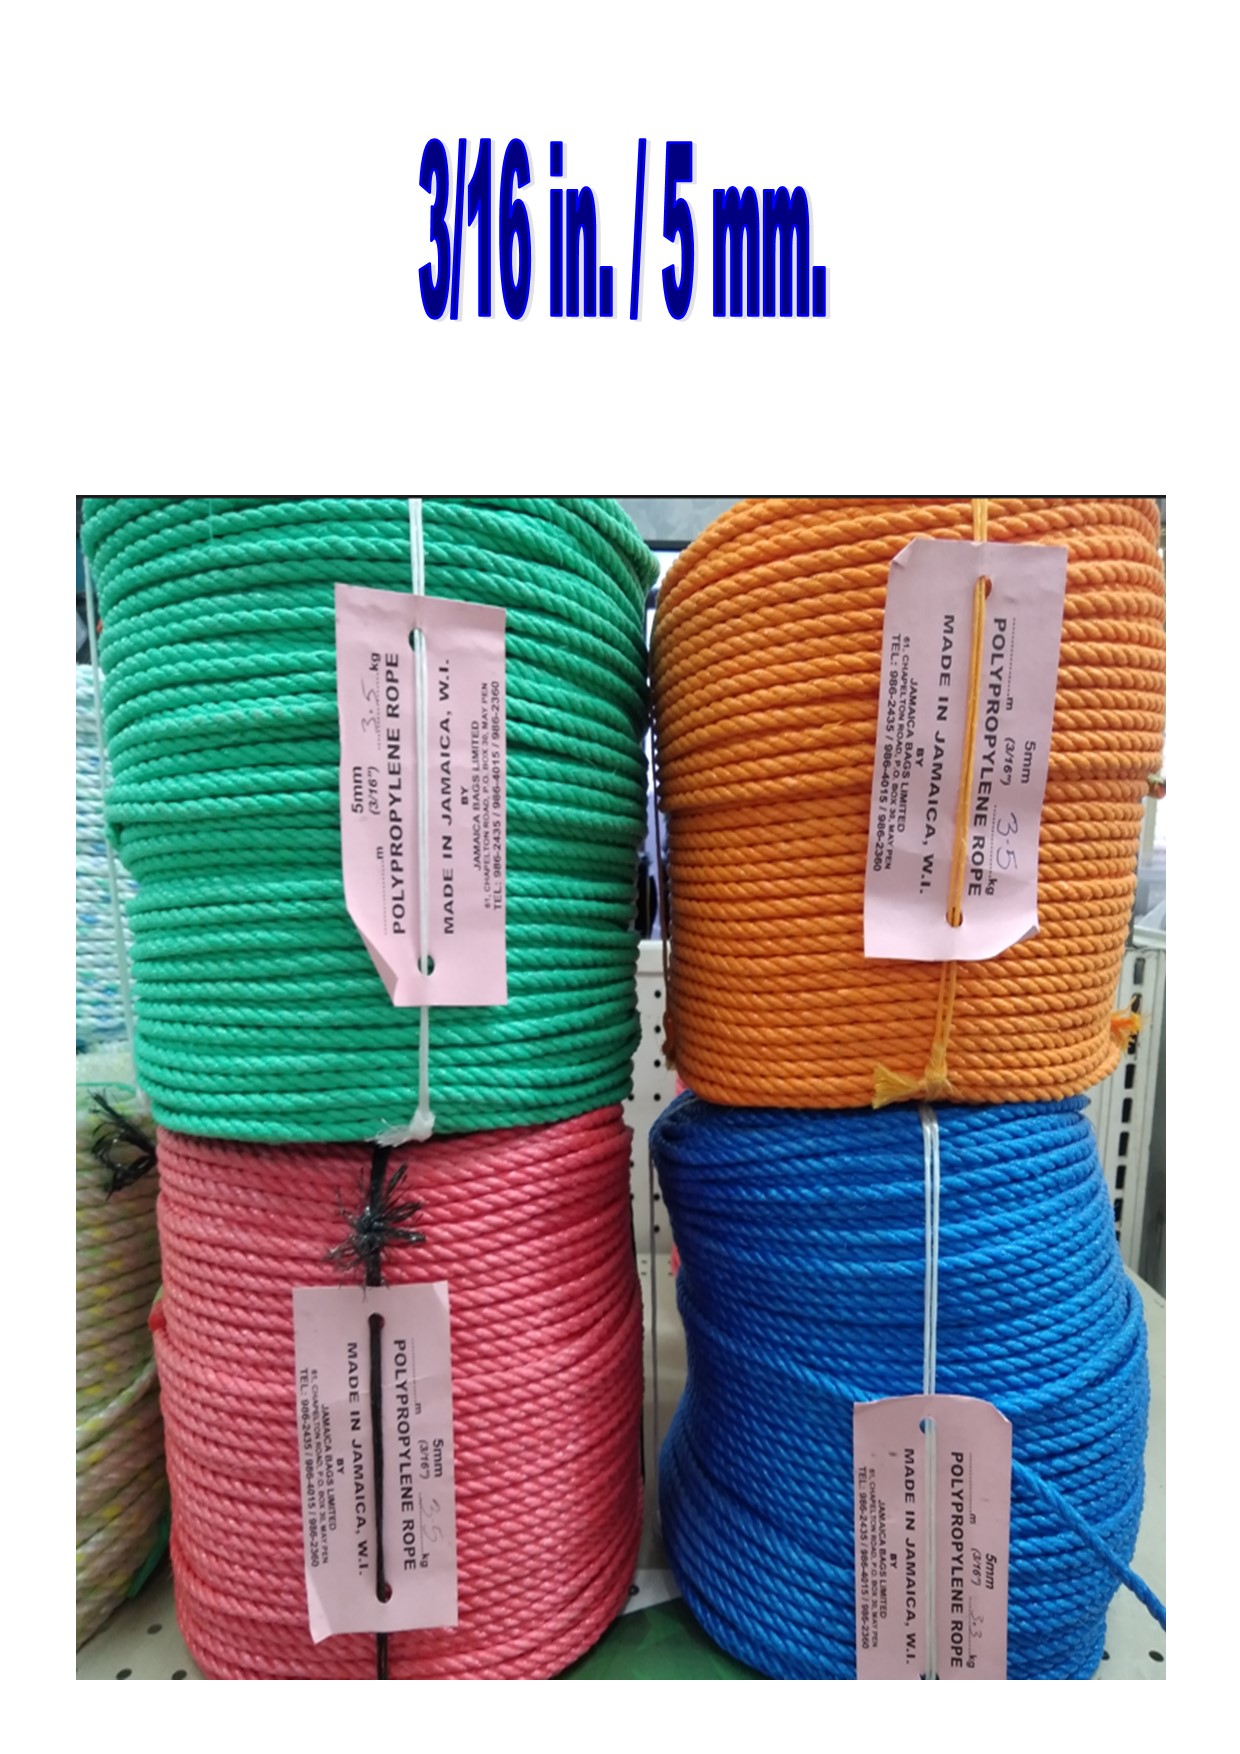 Solid Colour 3/16 in. Twisted Polypropylene Rope Sold Per Kilogram